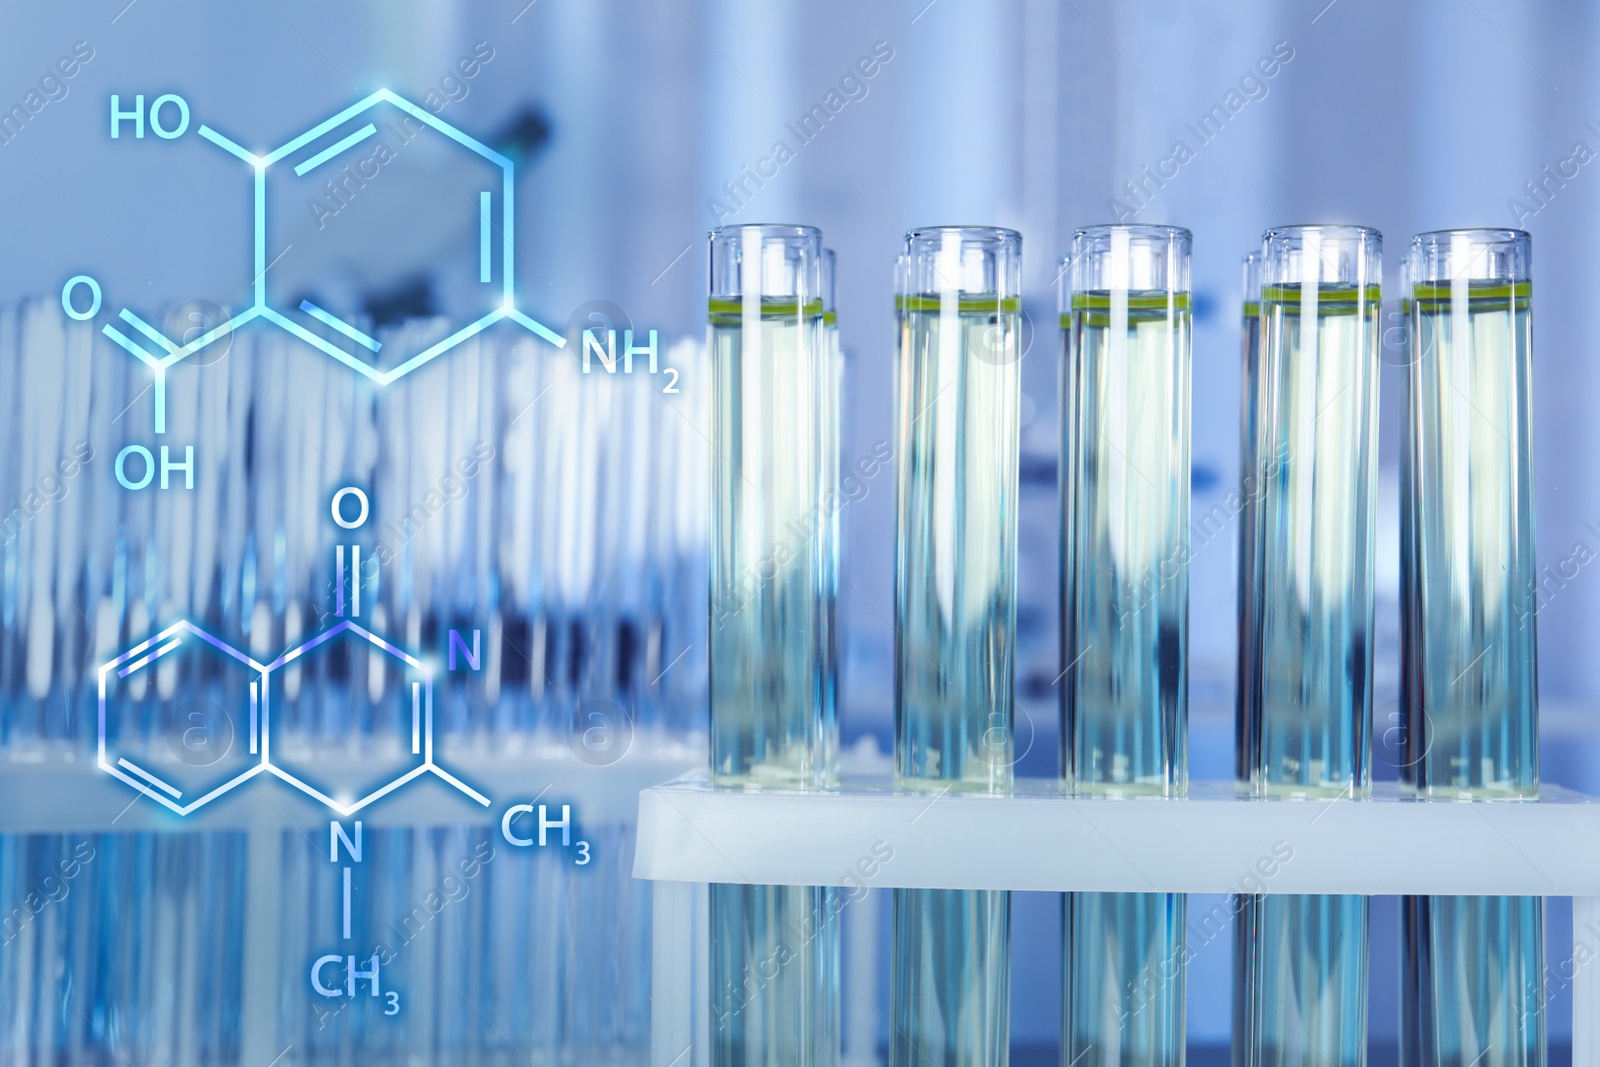 Image of Test tubes with liquid in laboratory, closeup